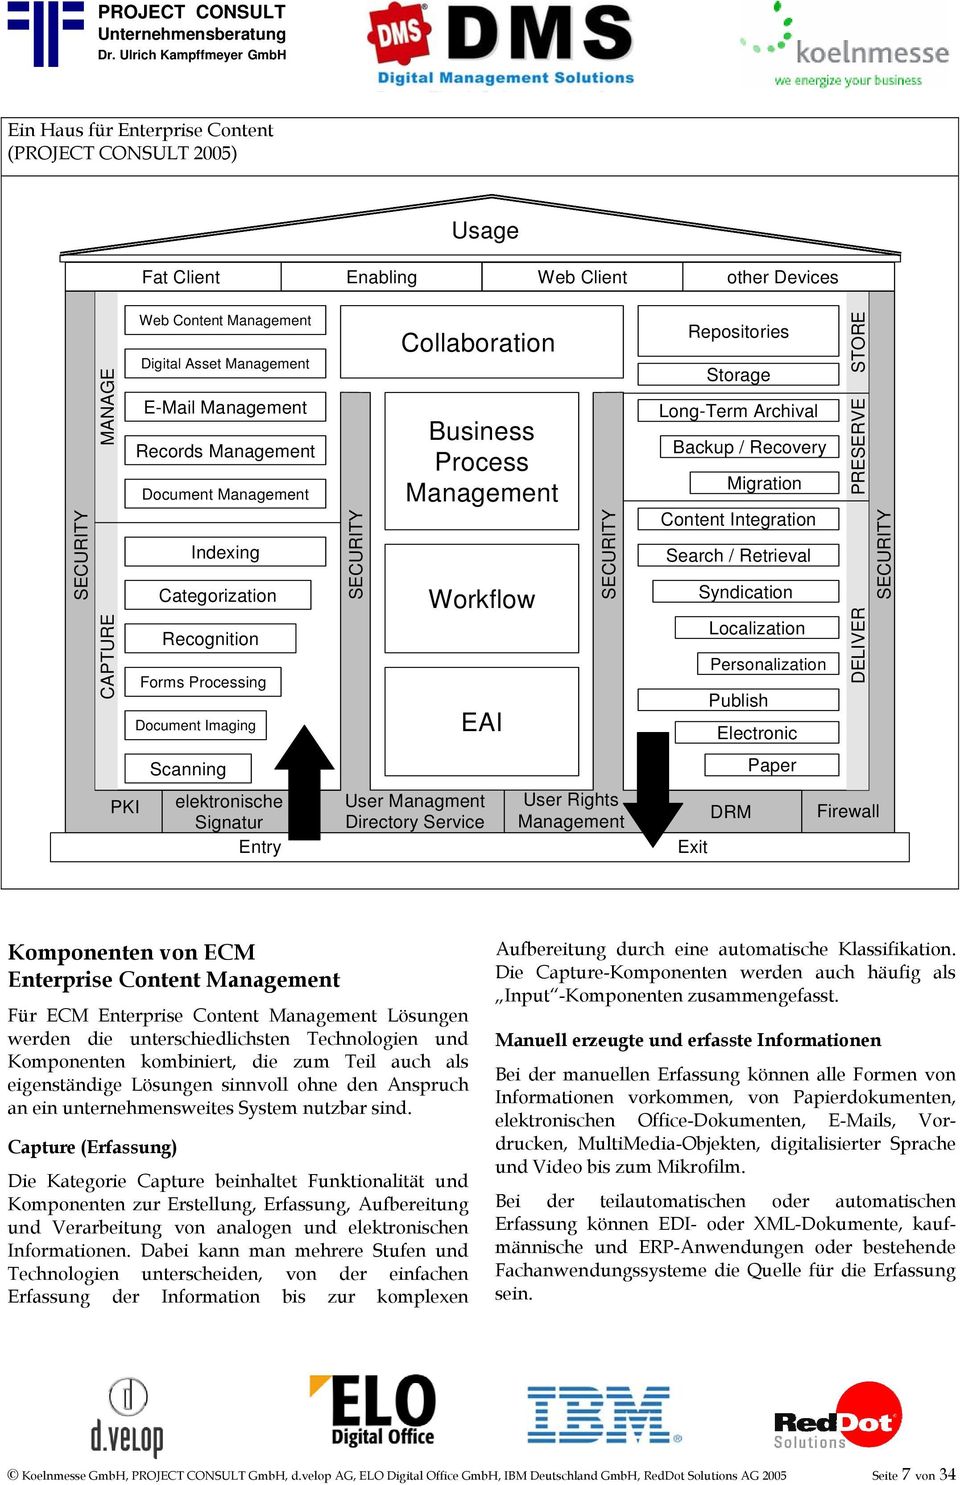 Management Workflow EAI User Managment Directory Service SECURITY User Rights Management Repositories Storage Long-Term Archival Backup / Recovery Migration Content Integration Search / Retrieval